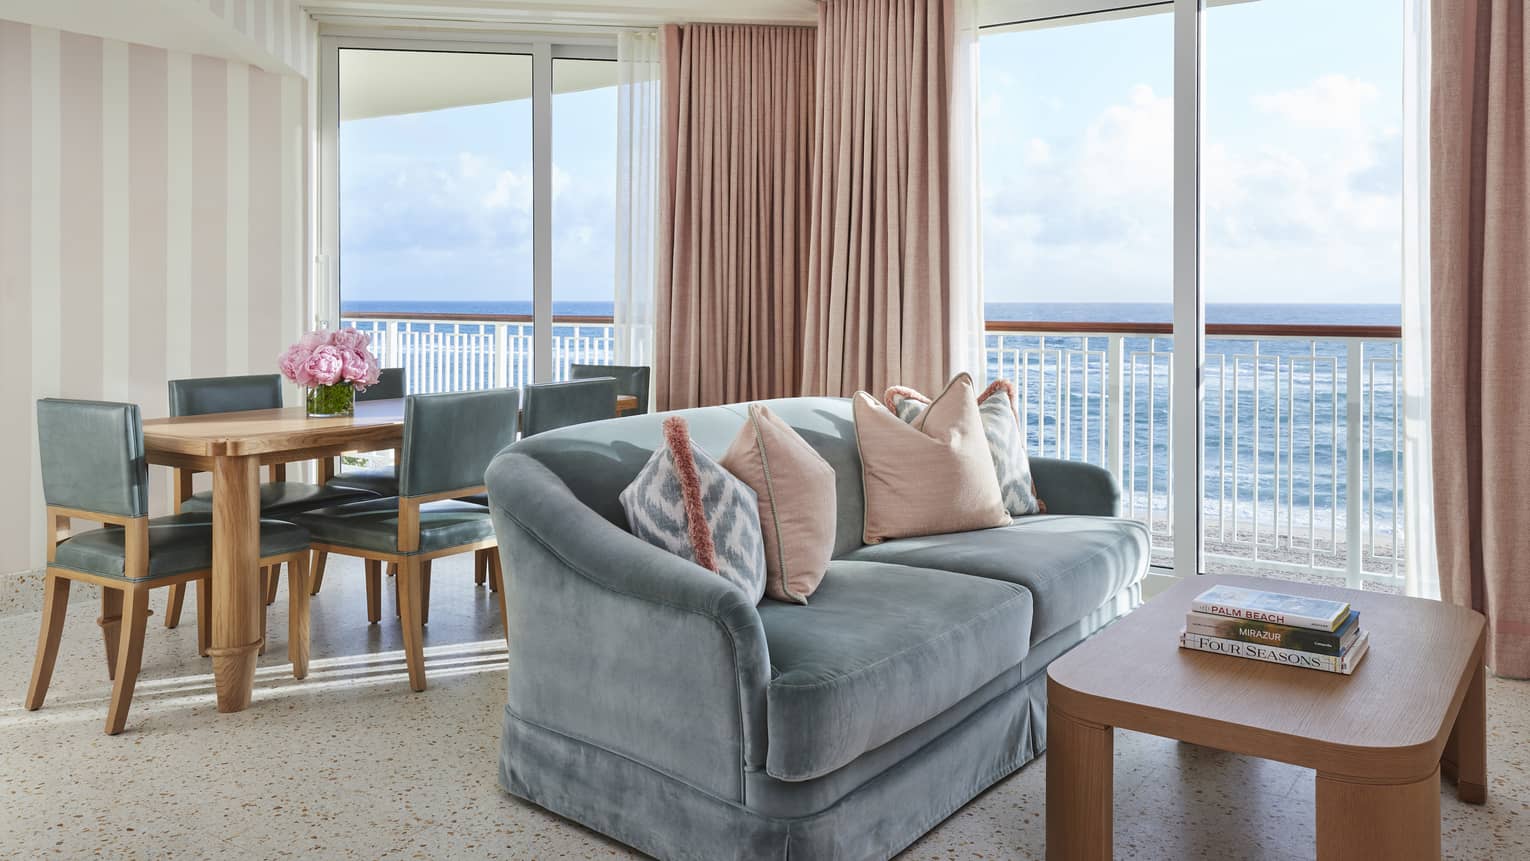 Dining table and two-seat sofa in a hotel suite's living room, with ocean views